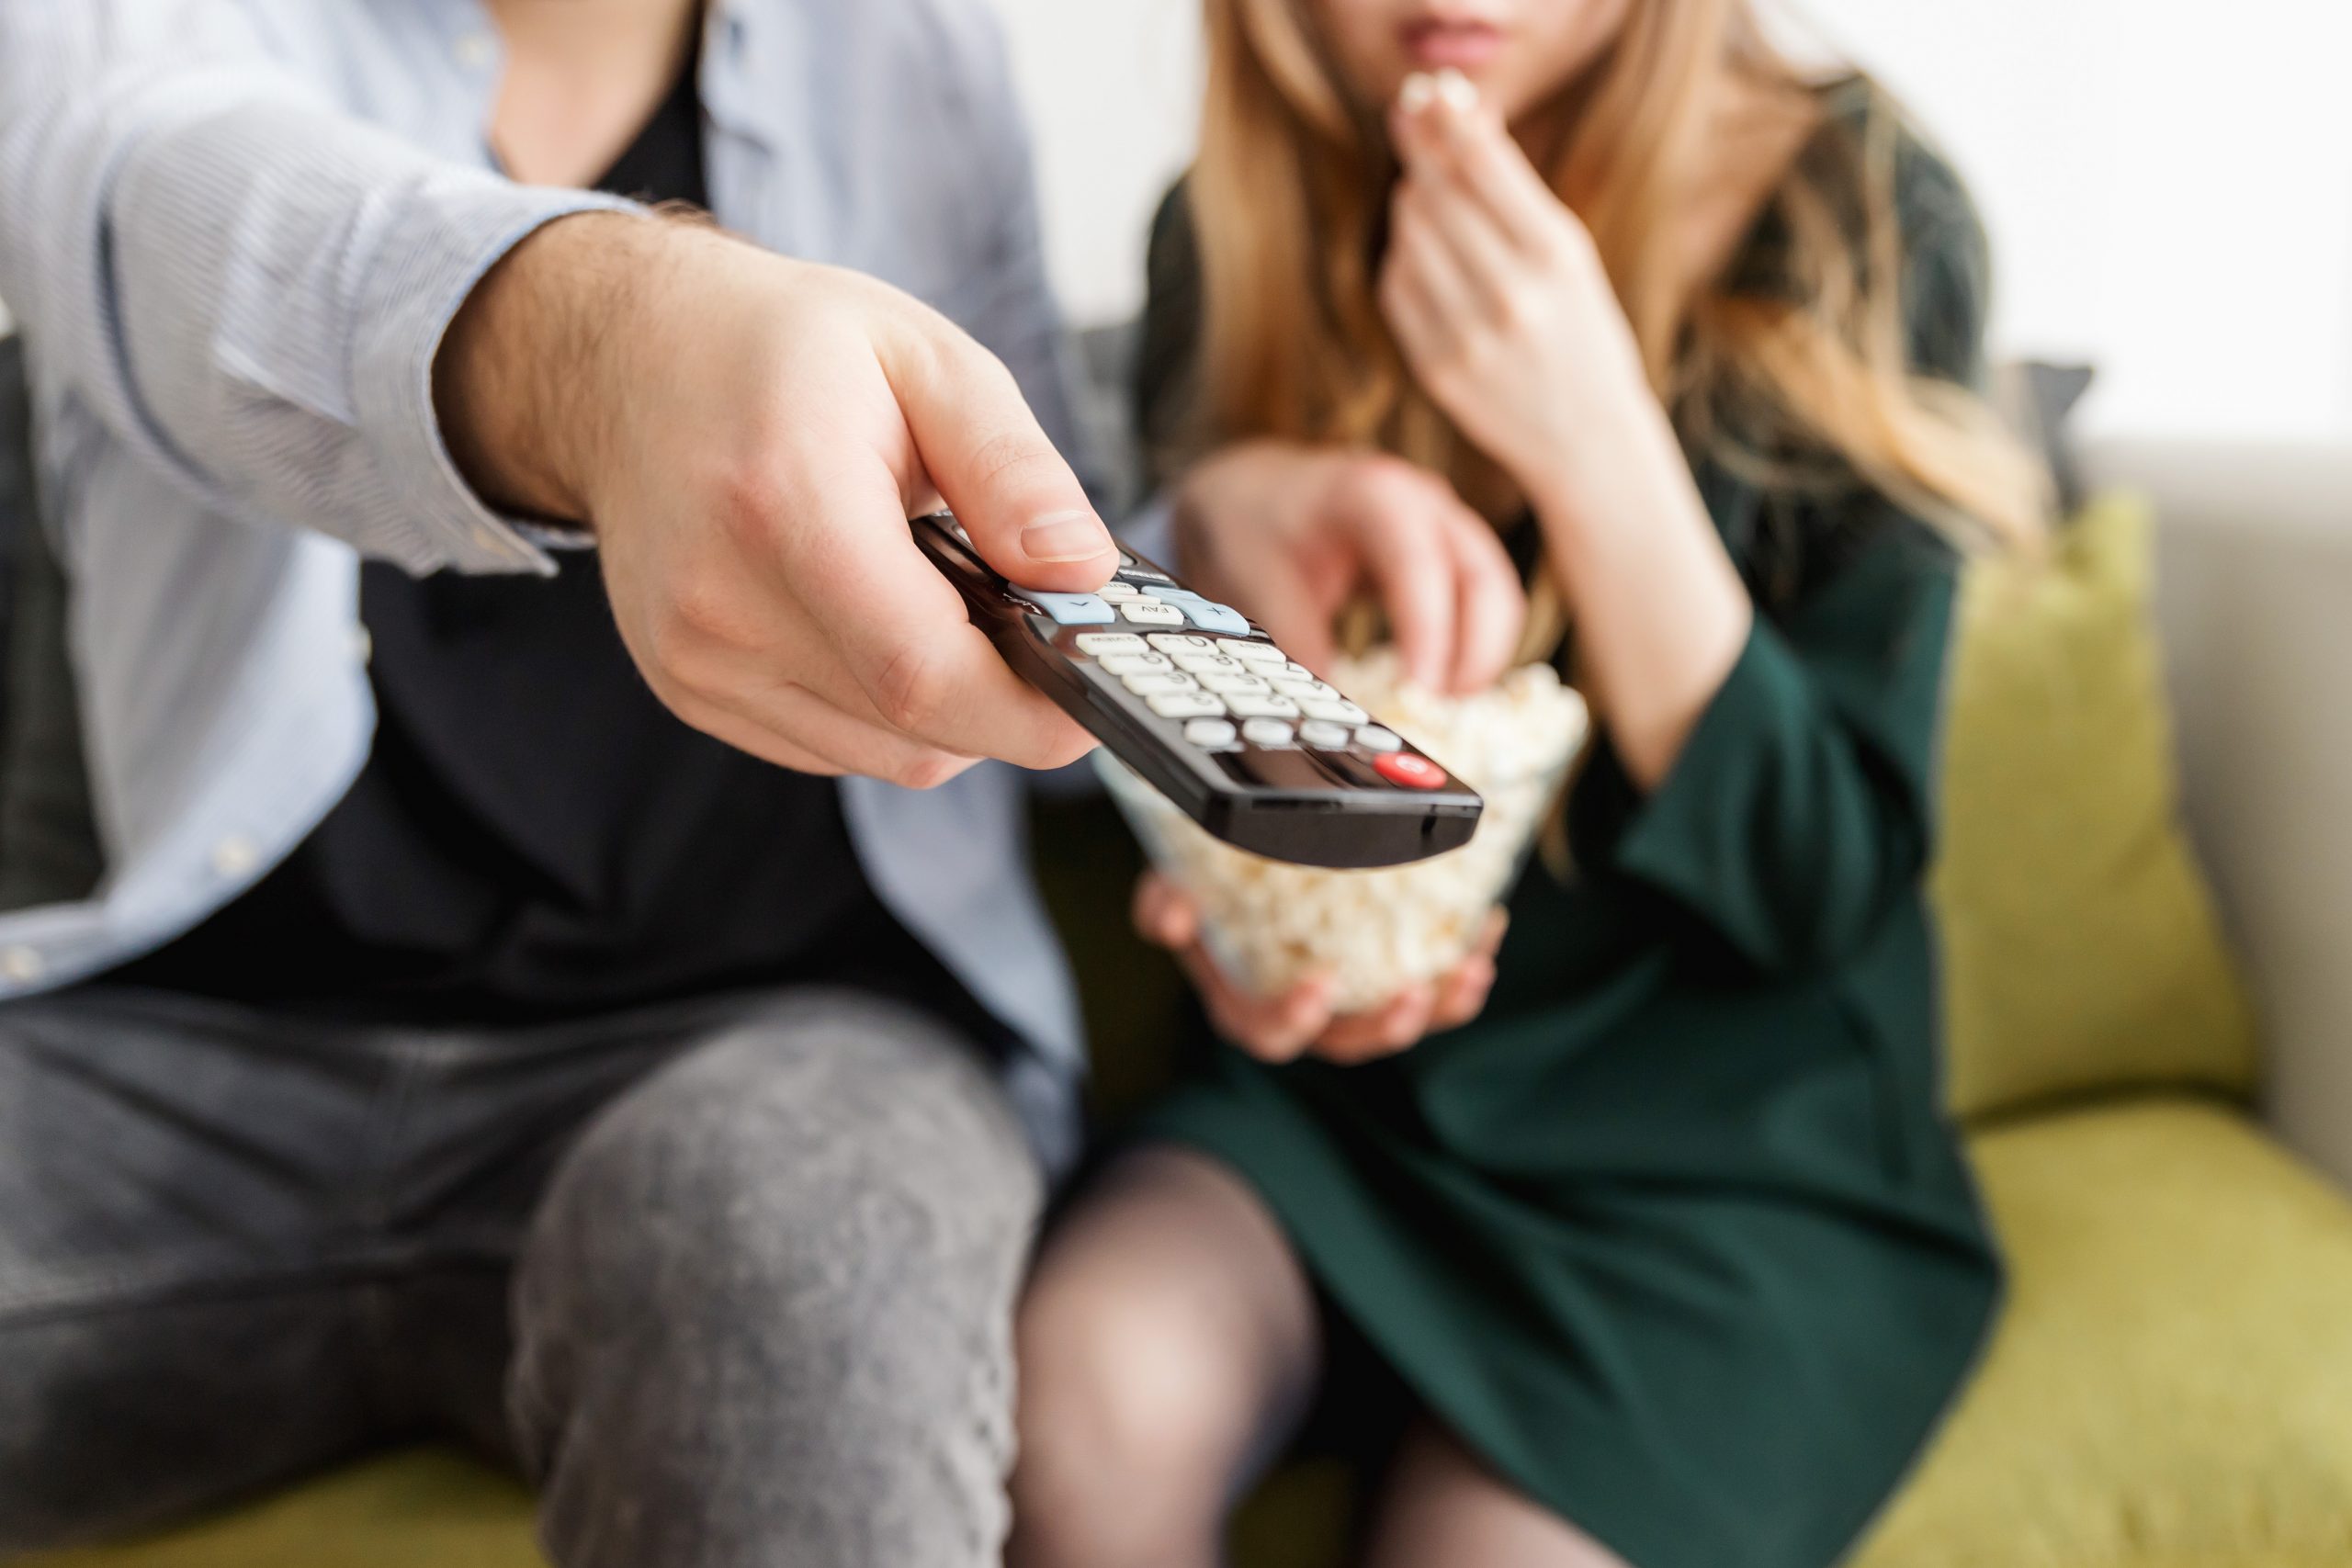 at home date ideas
couple movie night and popcorn
source: JESHOOTS from Pexels
